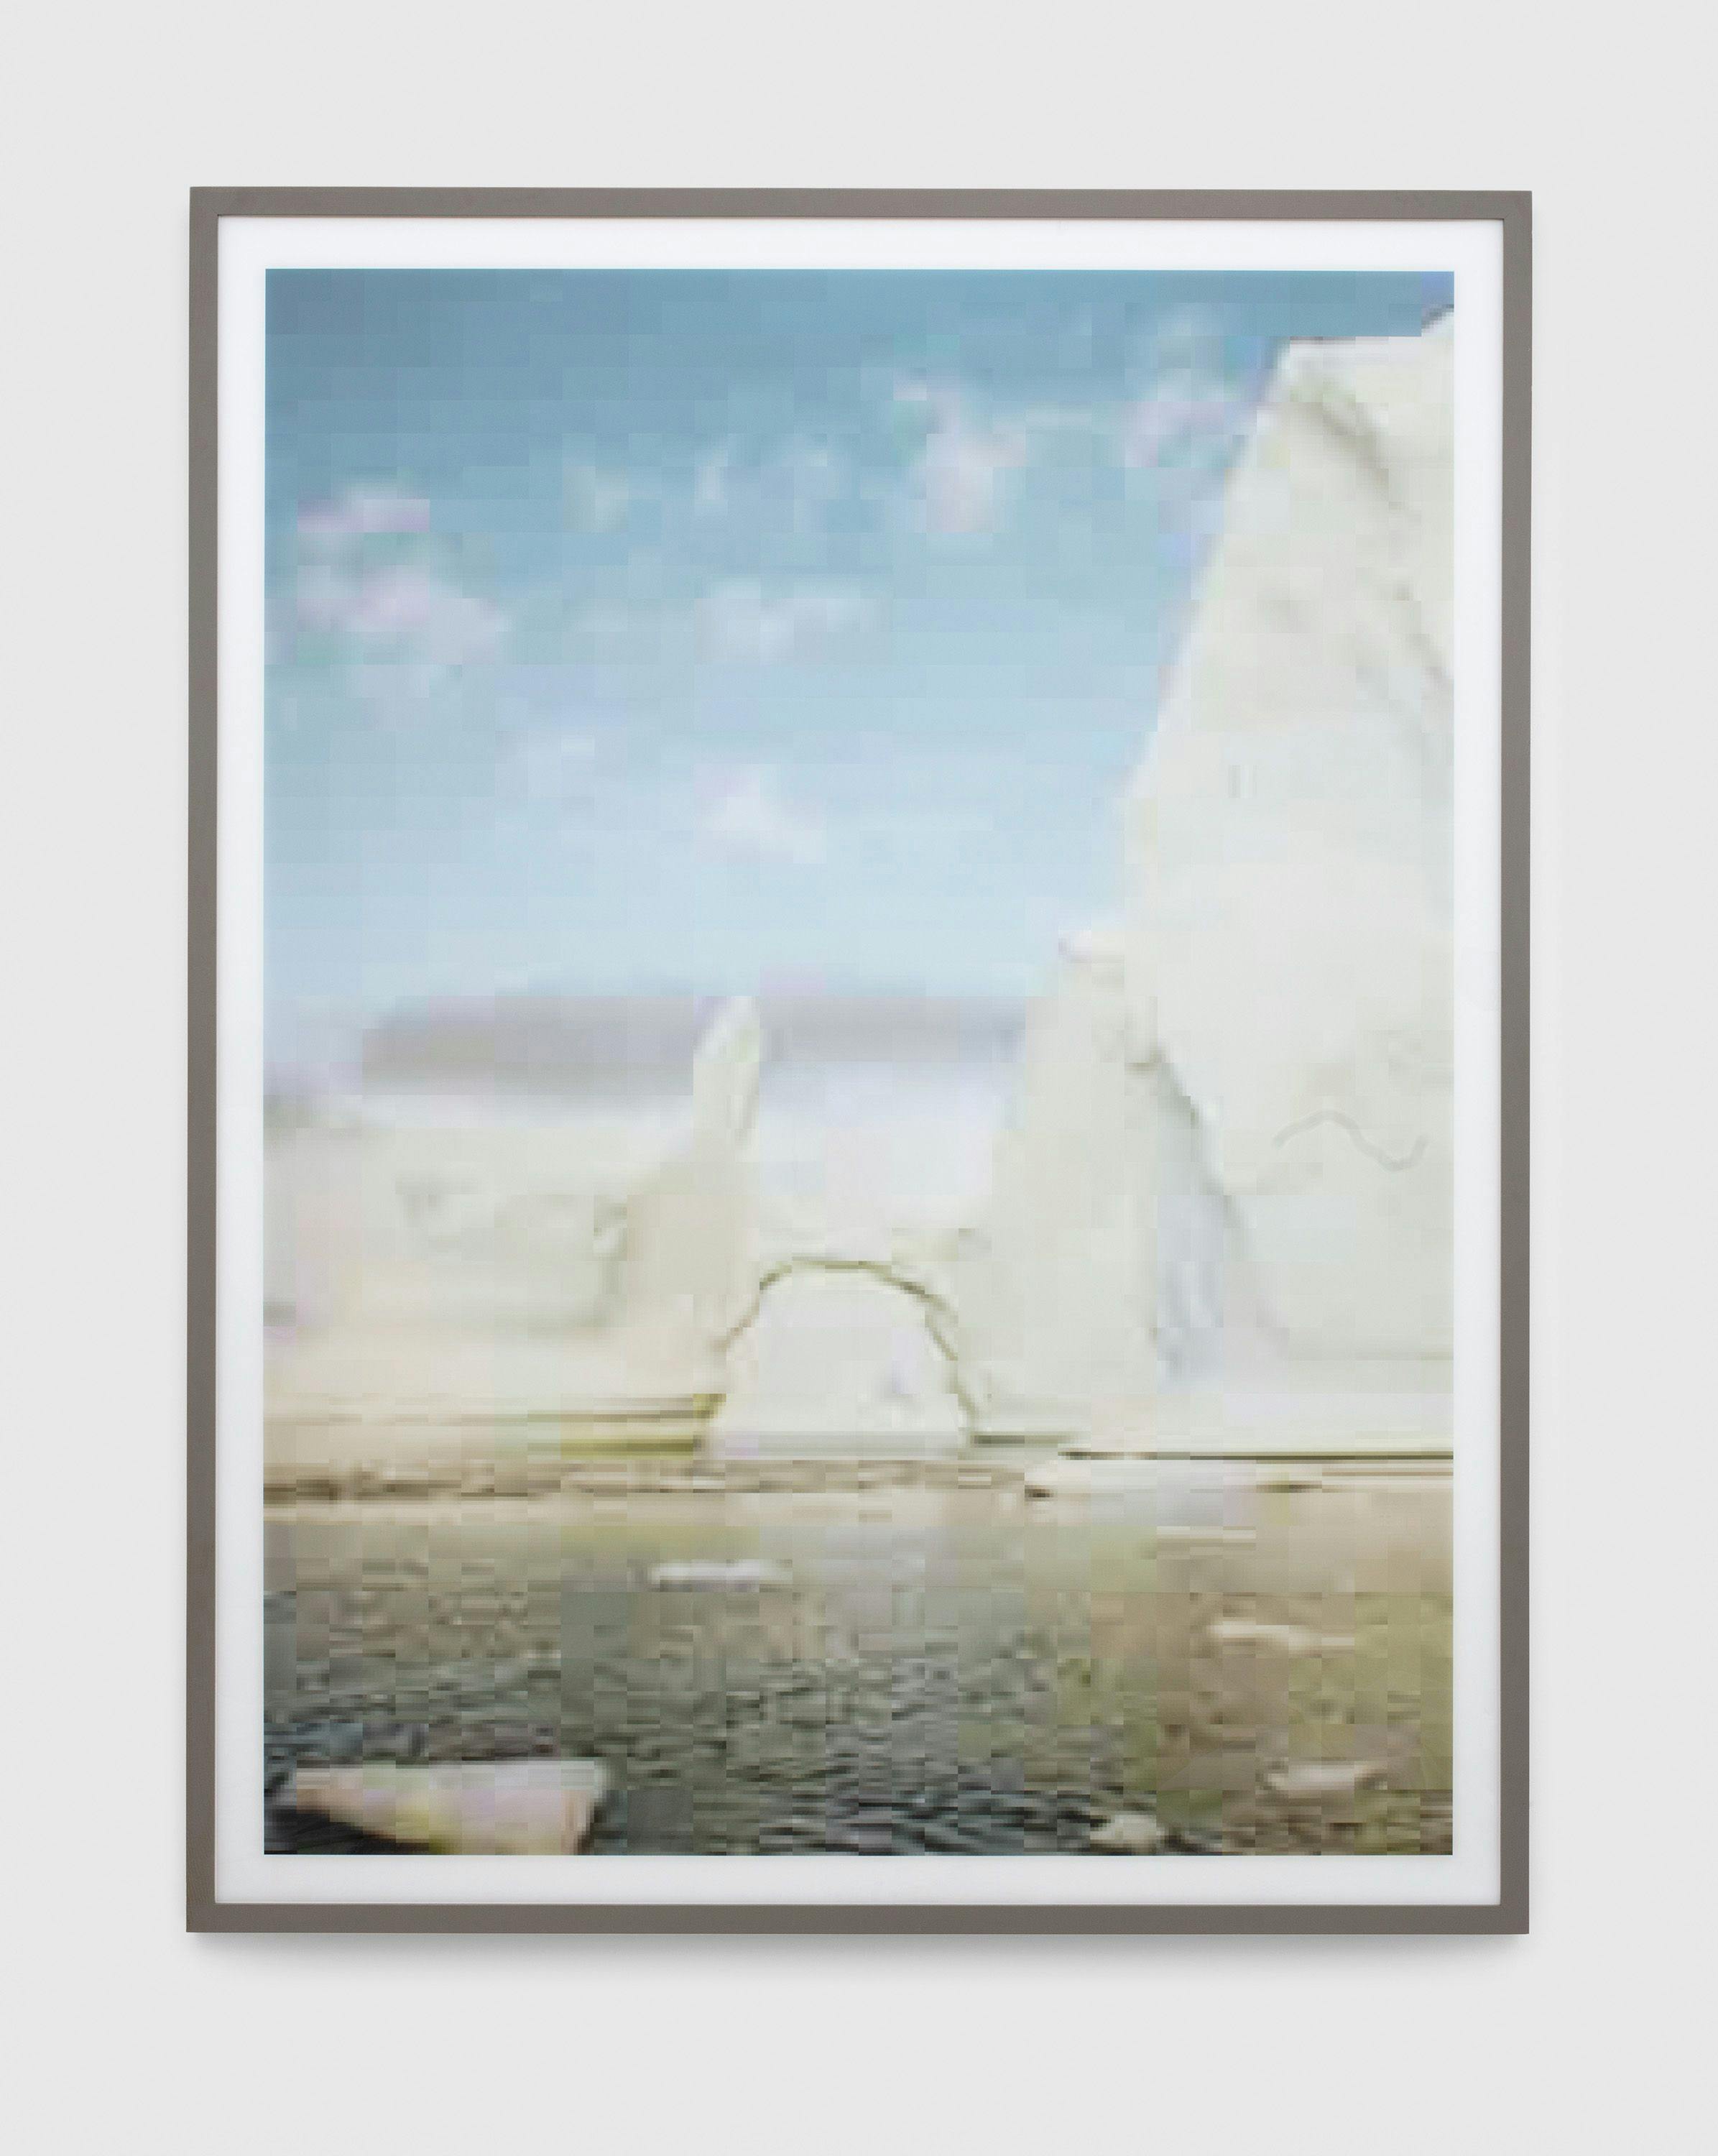 A chromogenic print with Diasec by Thomas Ruff, titled jpeg ib02, dated 2007.